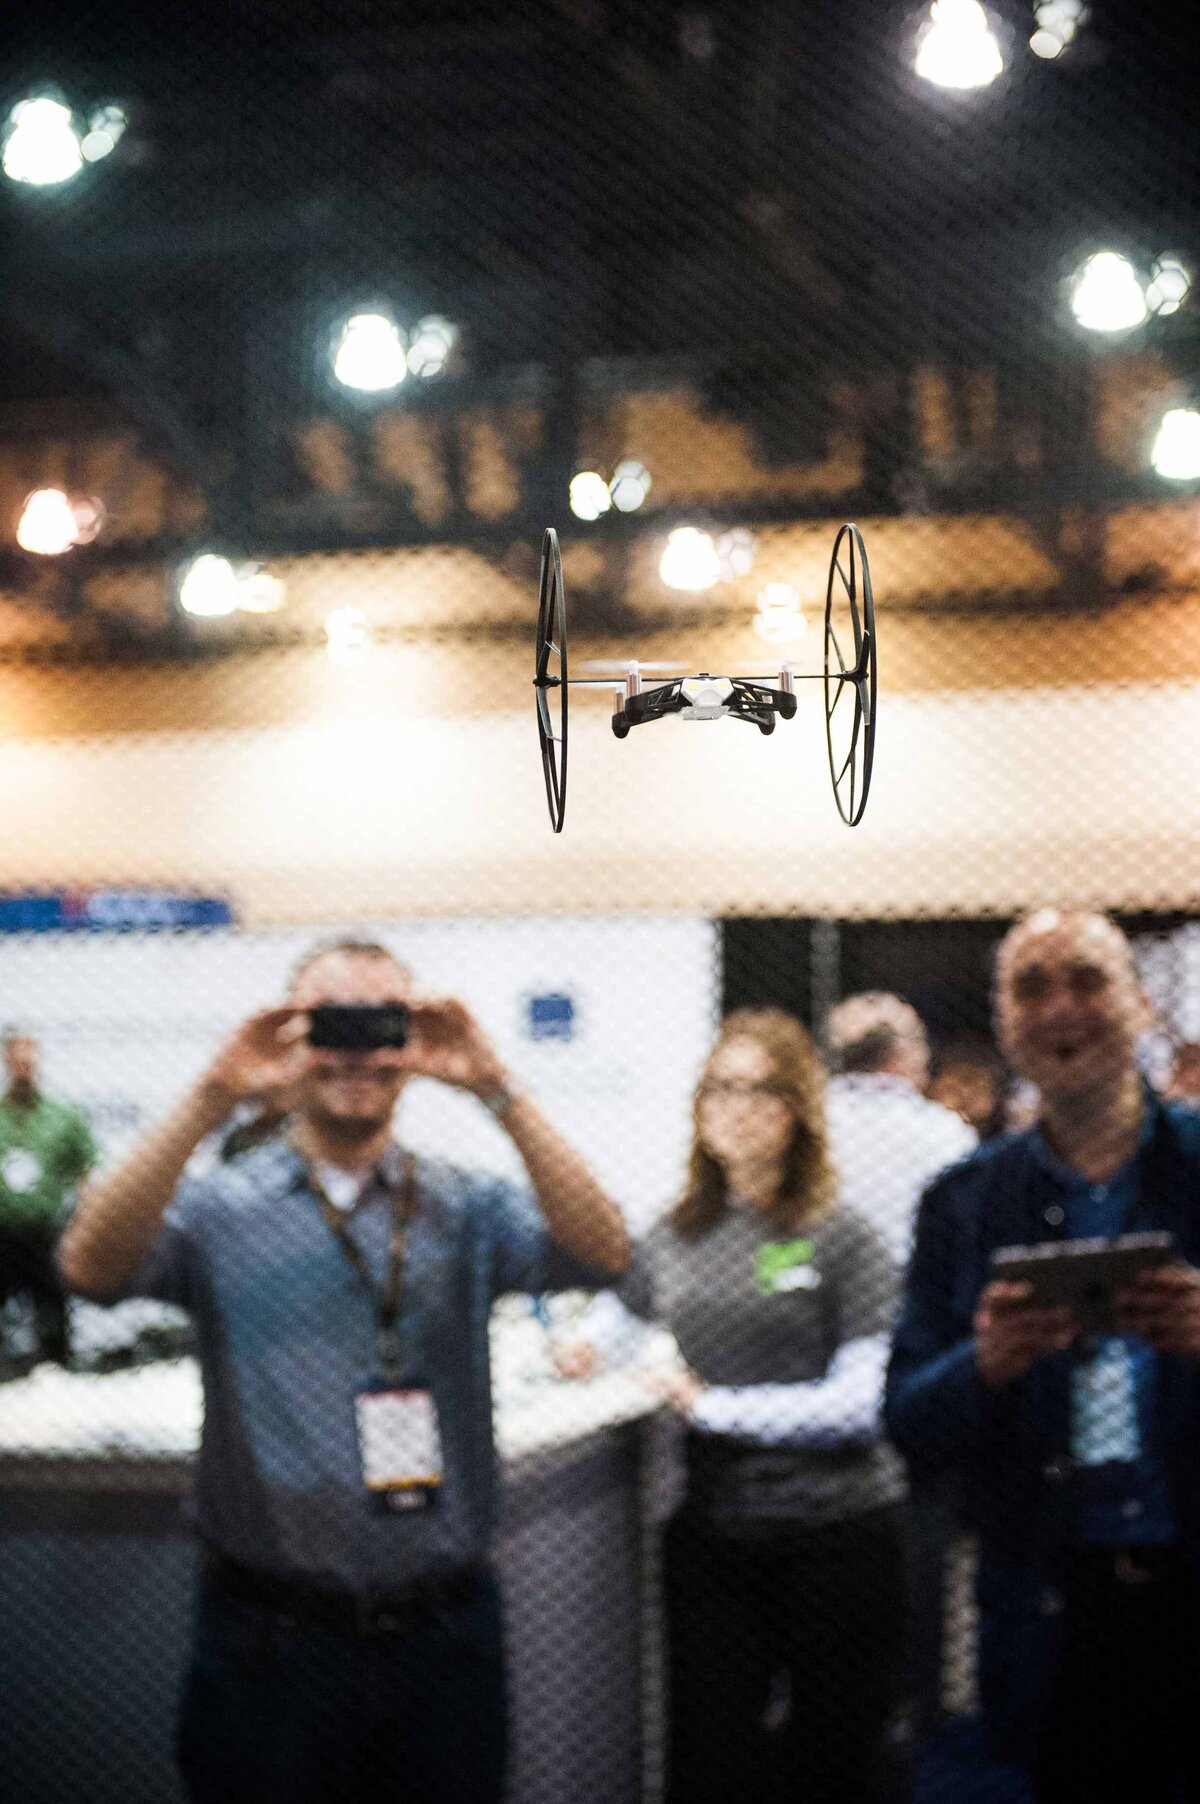 A small drone being flown indoors at engineering conference as onlooker takes a photo in the background.